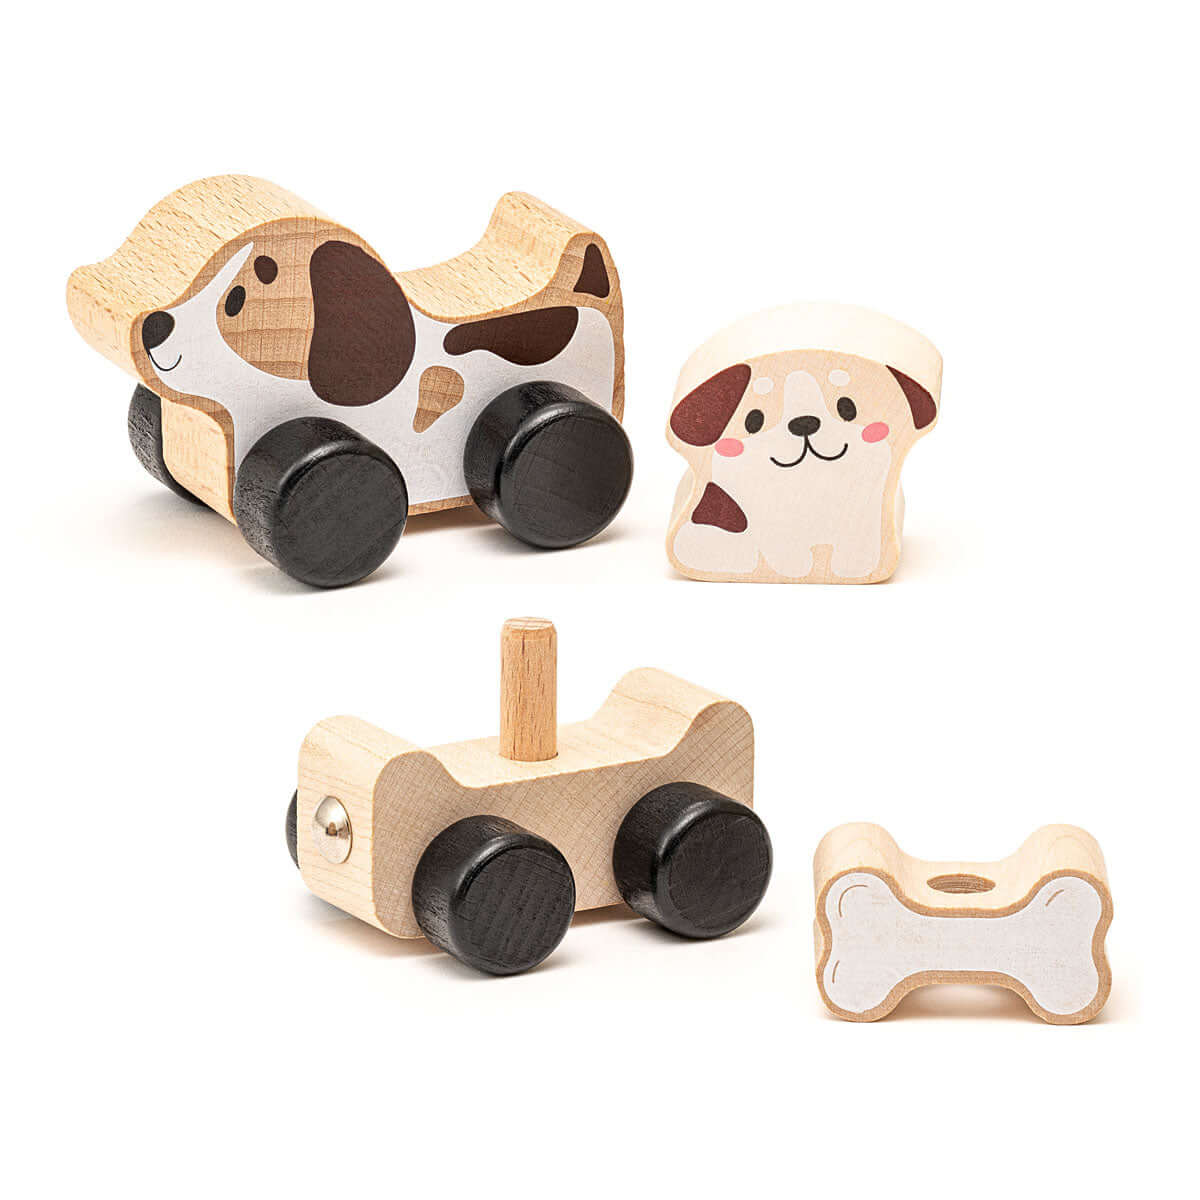 Clever Puppies Wooden Train, Cubika, eco-friendly Toys, Mountain Kids Toys